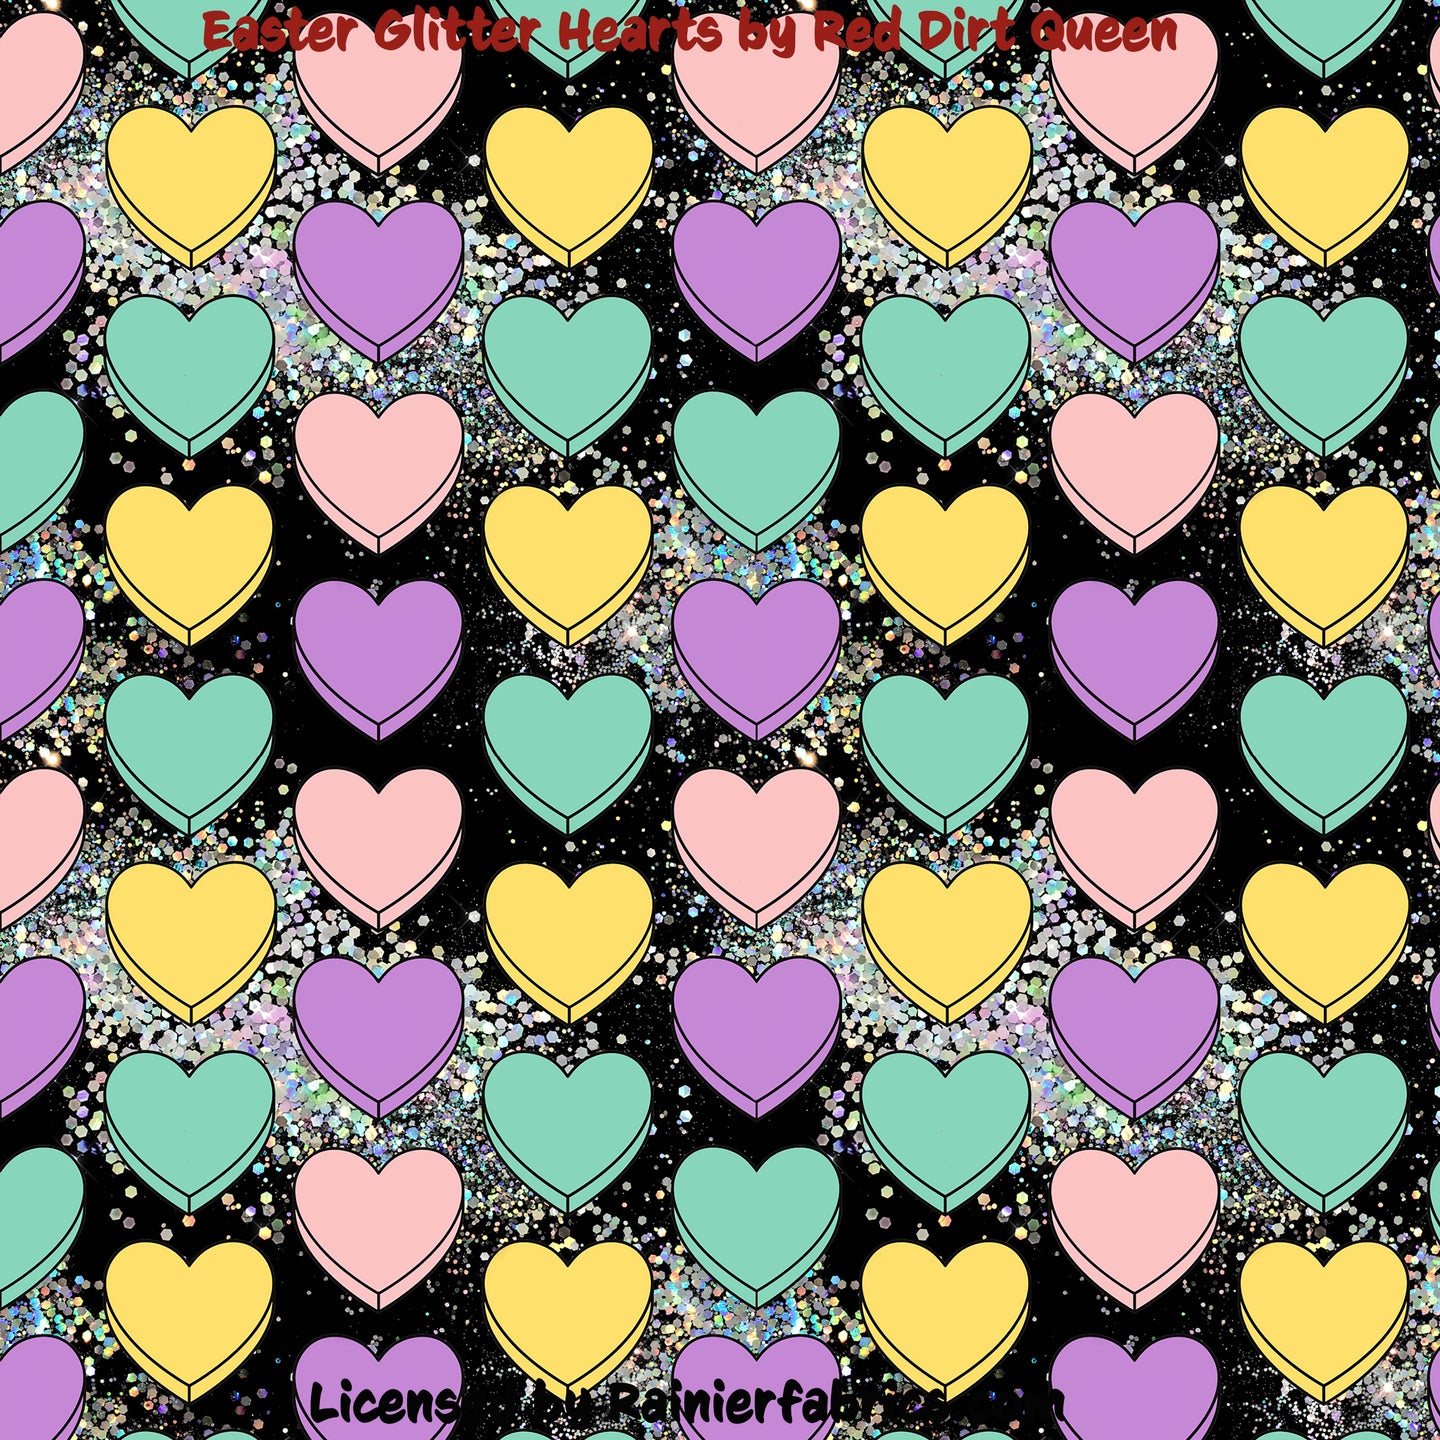 Easter Glitter Hearts by Red Dirt Queen - 2-5 day turnaround - Order by 1/2 yard; Description of bases below